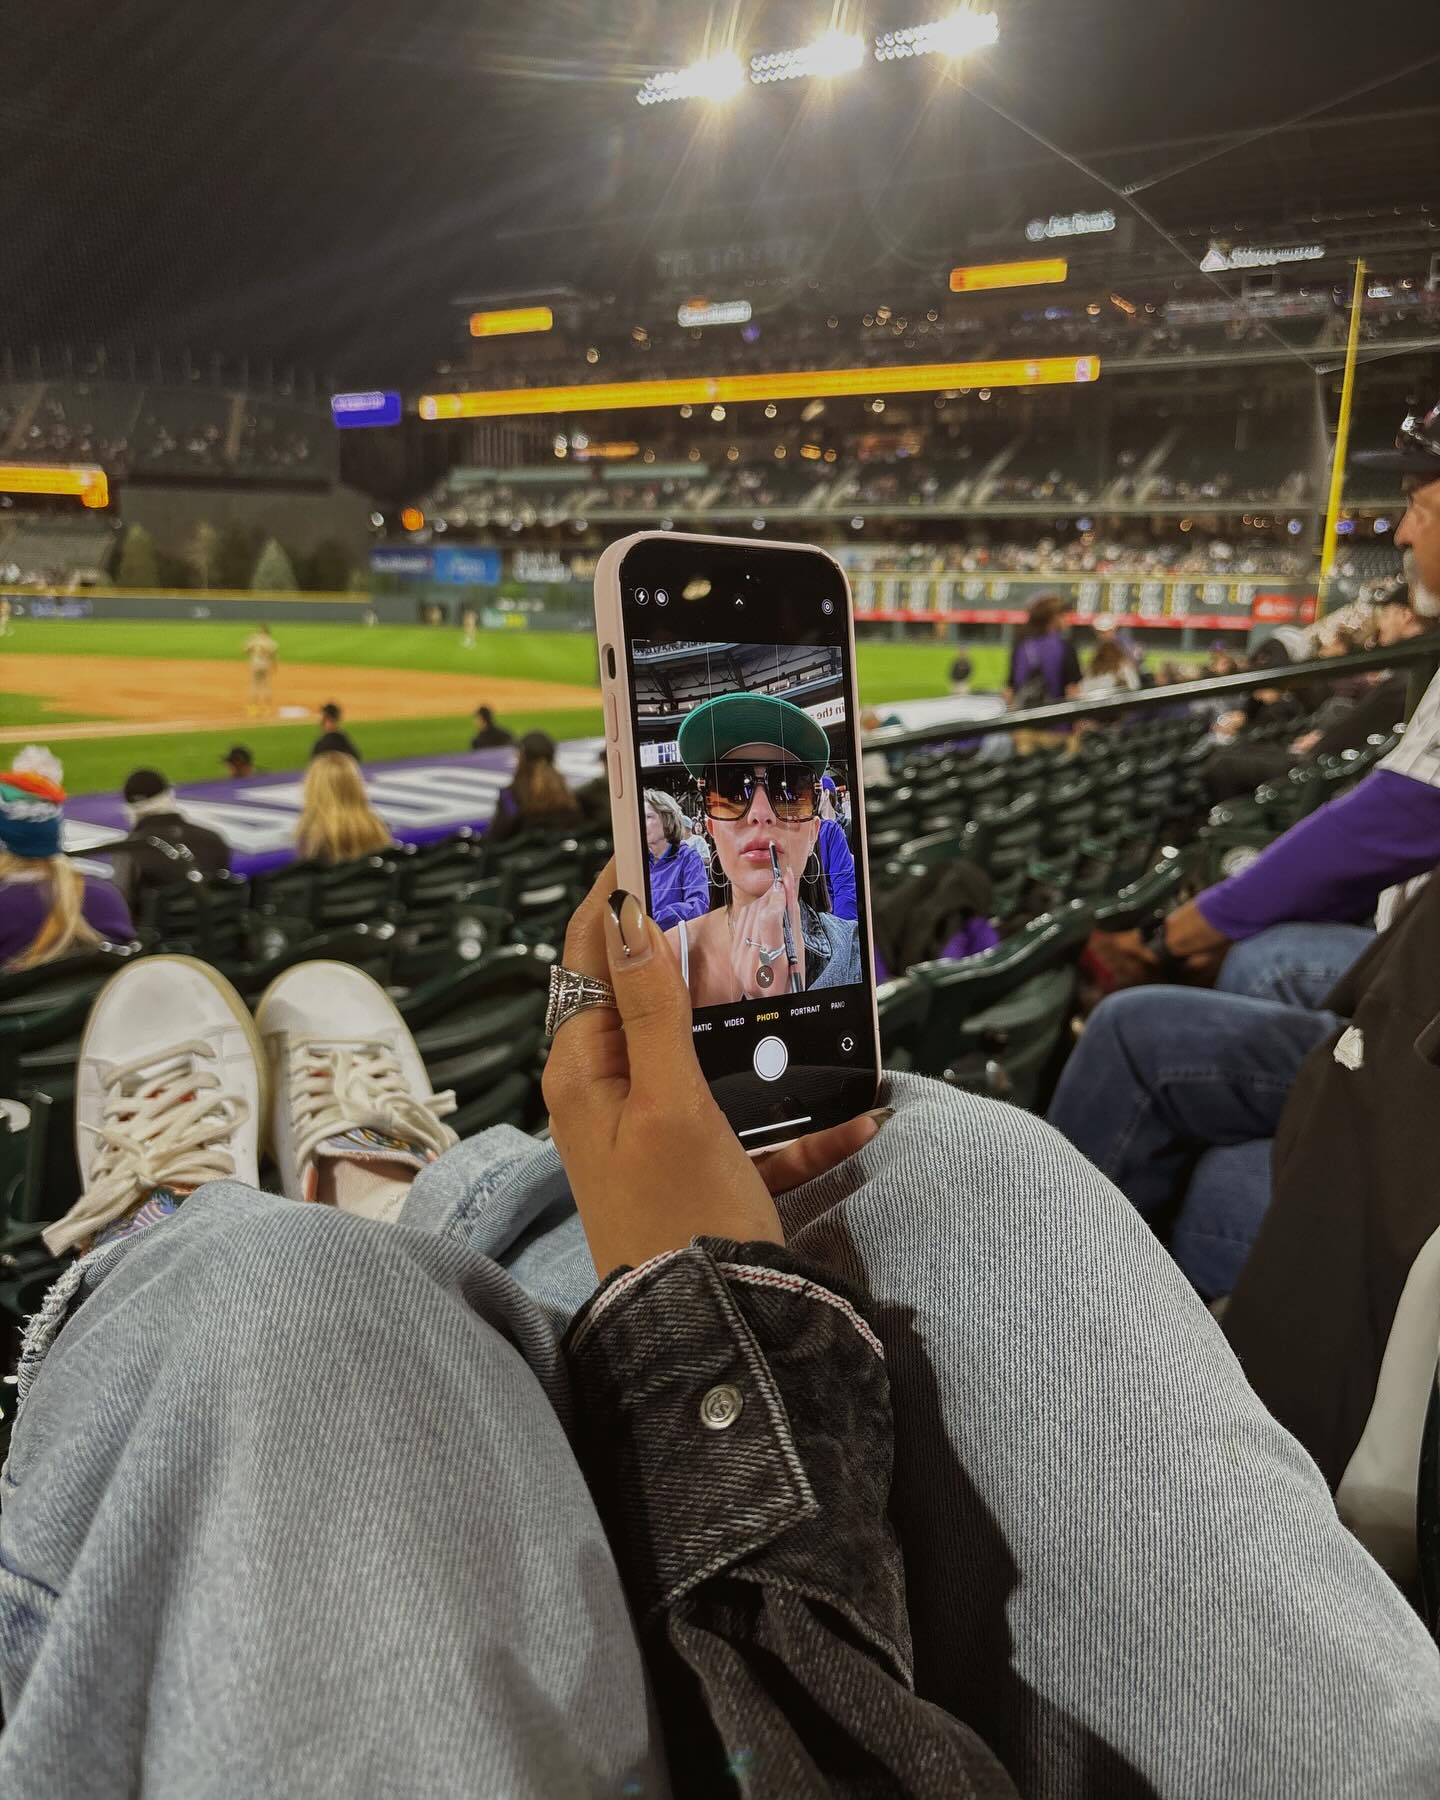 having fun with @teamseatgeek ⚾️
use code TAYTHATCHERR for $20 off any tickets <3